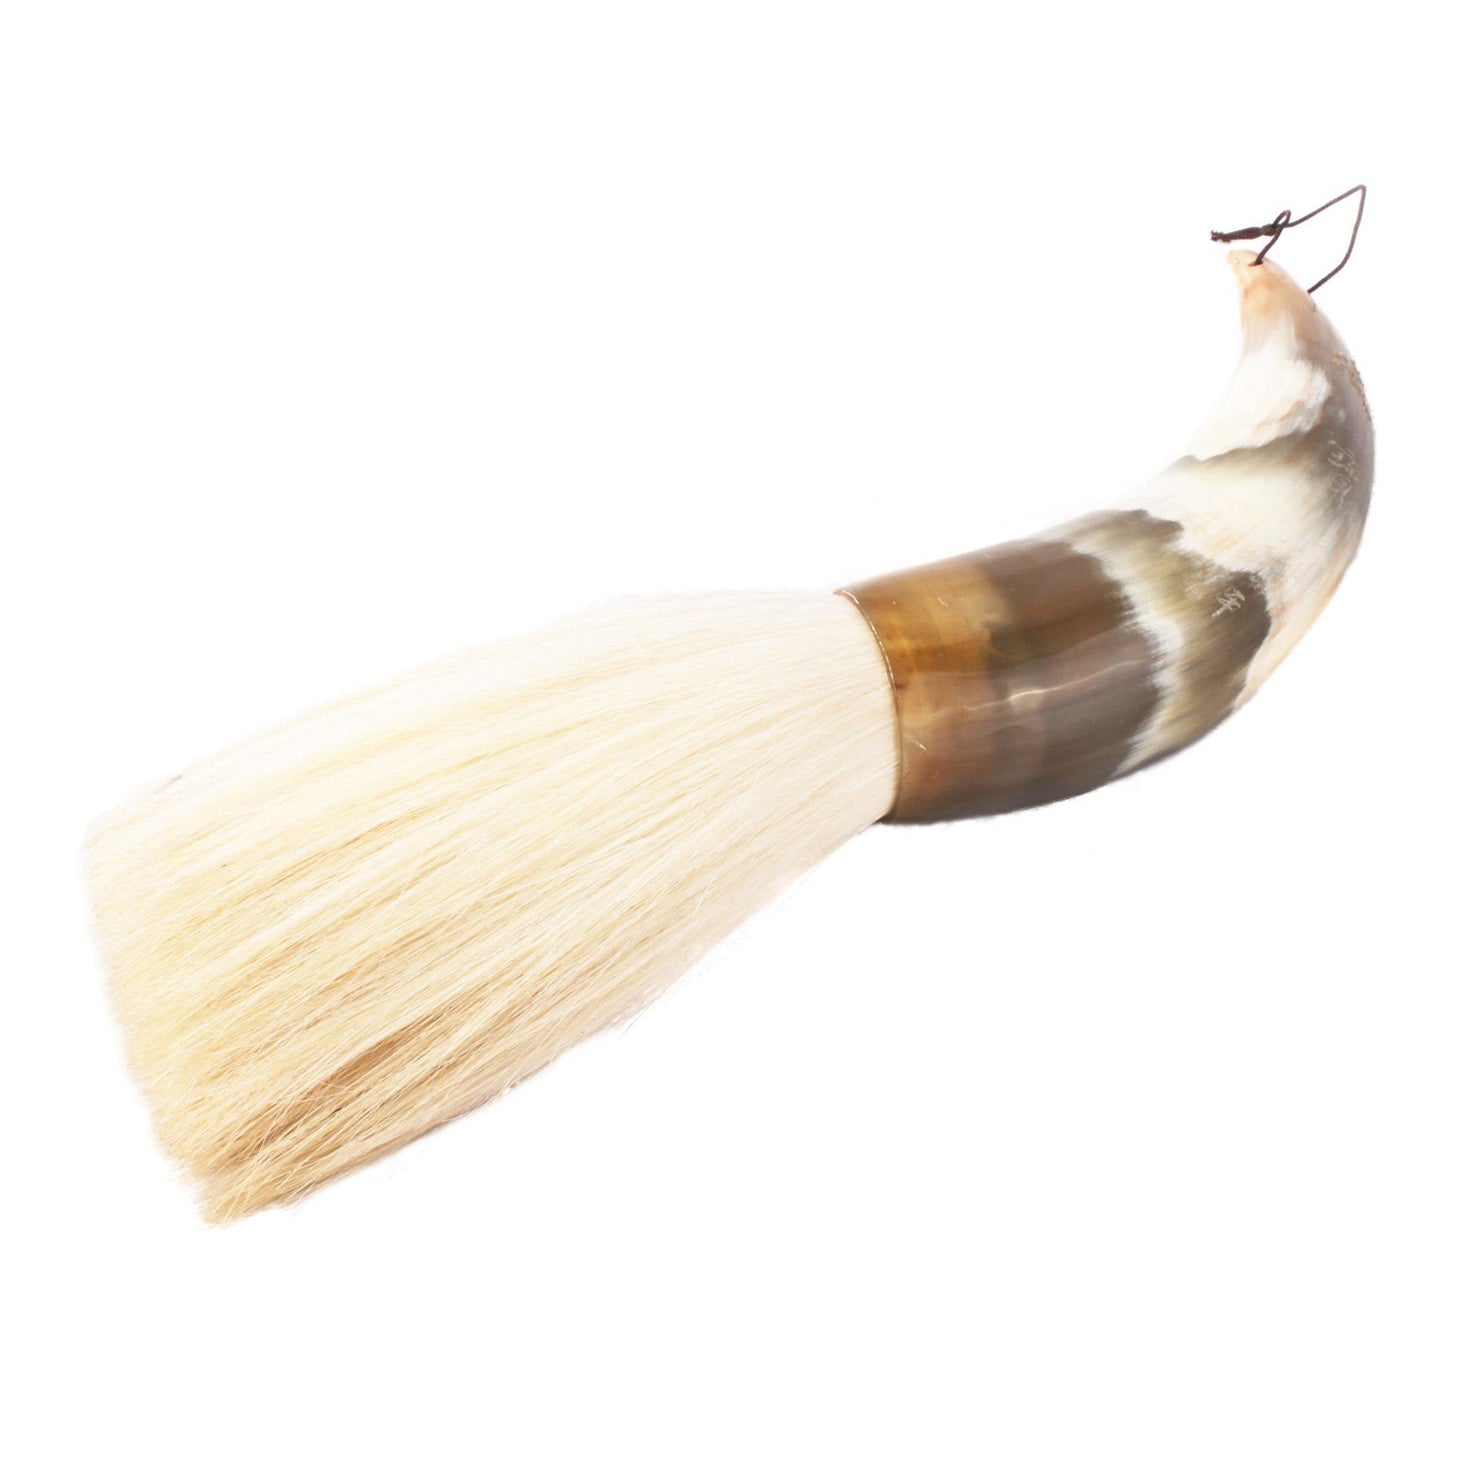 An excellent brush made of Goat Hair with a Long and Extra Large Tip for Calligraphy Writing and Sumi-e Painting.